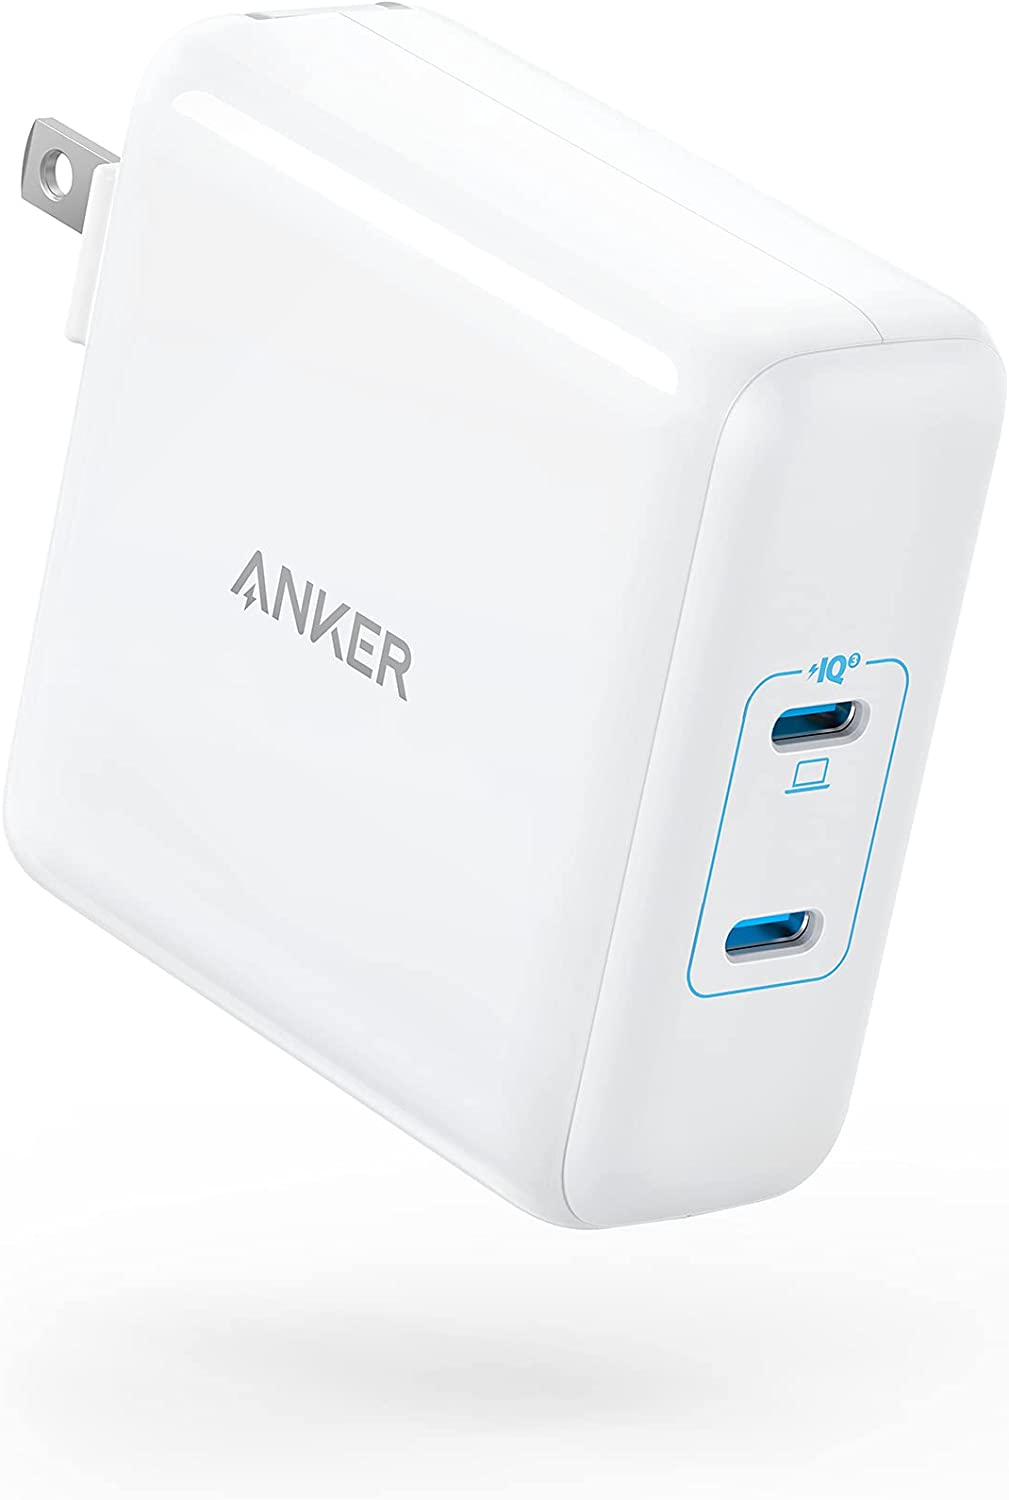 Amazon Prime Members: 100W 2-Port Anker PowerPort III USB-C Charger $36.79 + Free Shipping